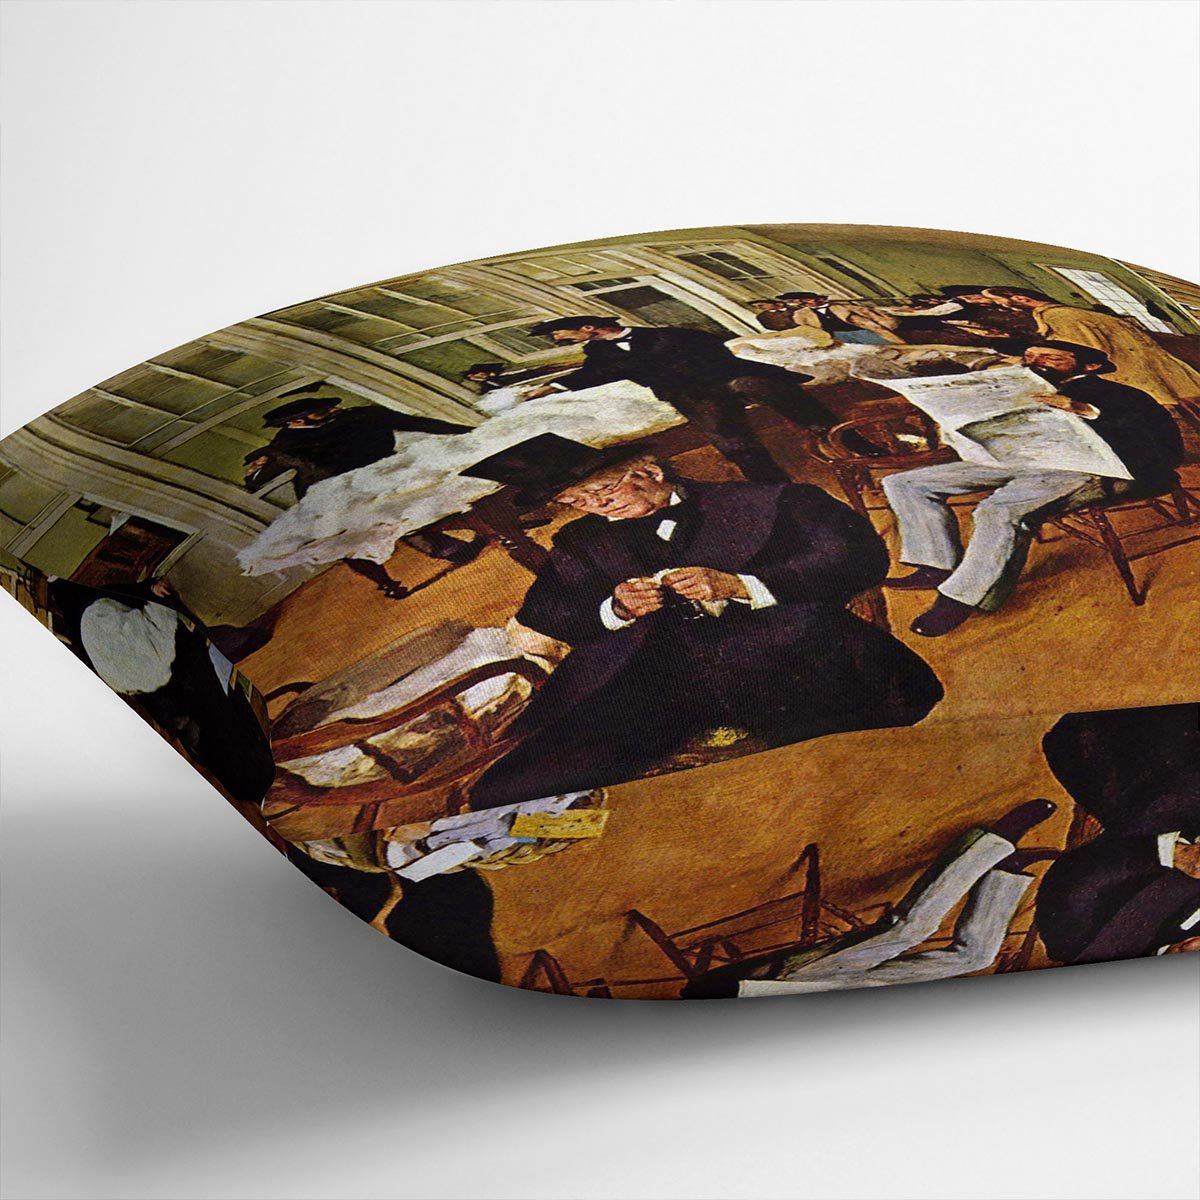 The cotton office in New Orleans by Degas Cushion